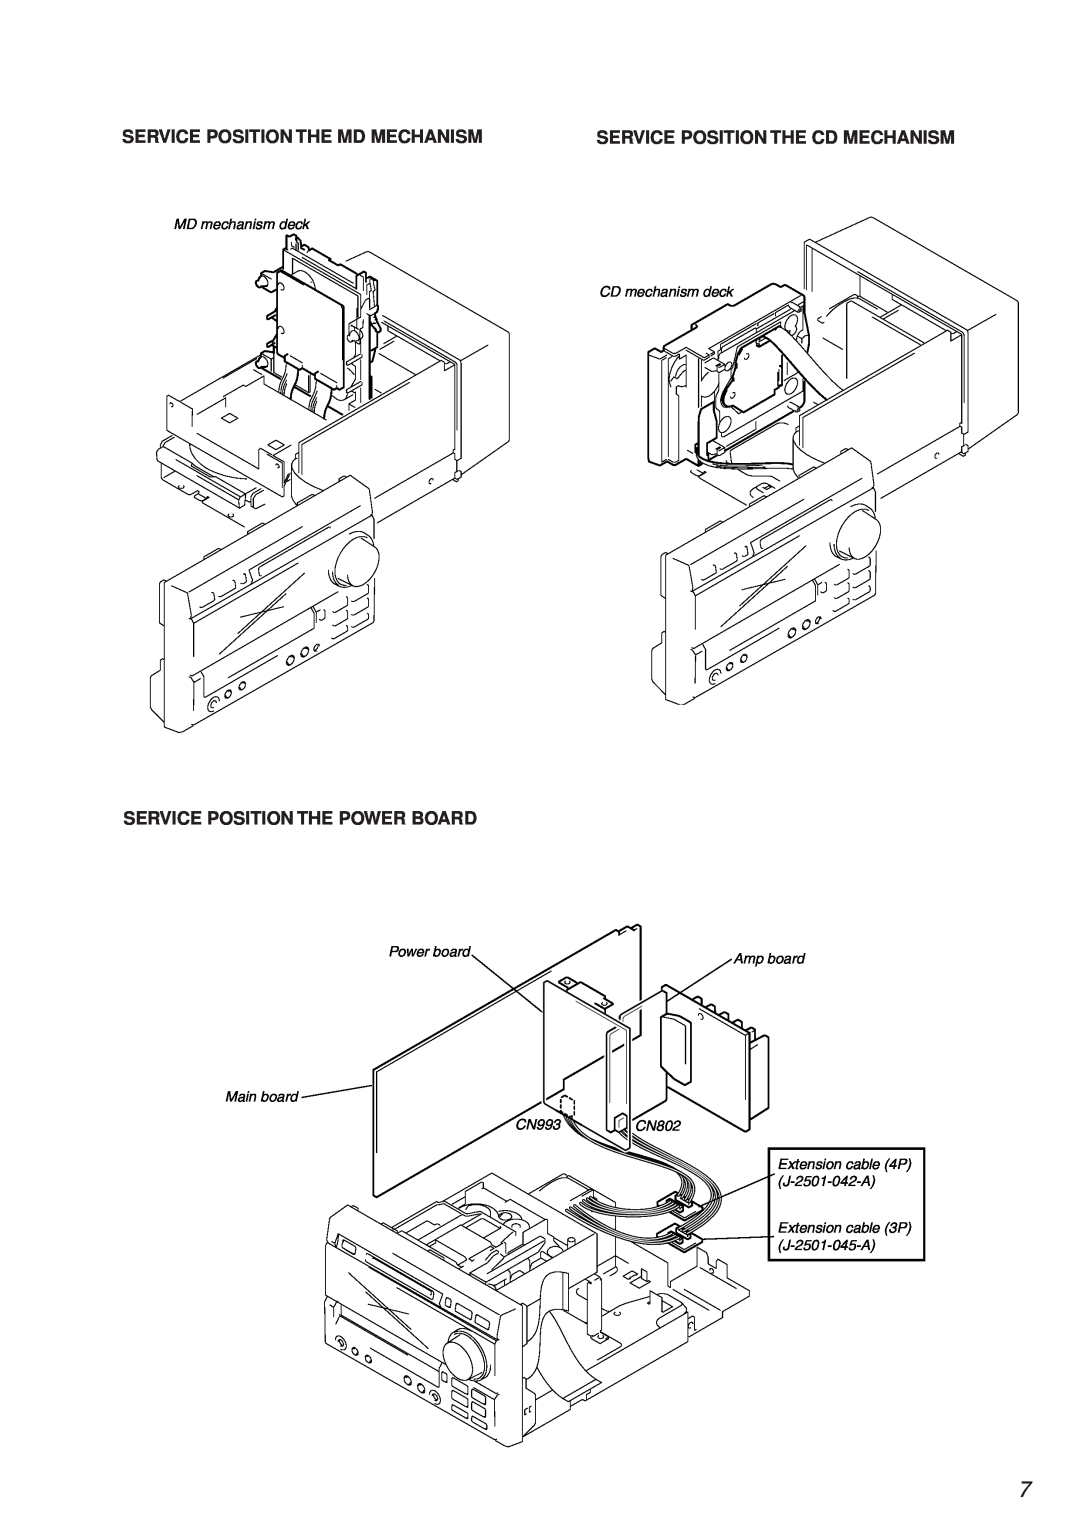 Sony HCD-MD373 Service Position The Md Mechanism, Service Position The Cd Mechanism, Service Position The Power Board 